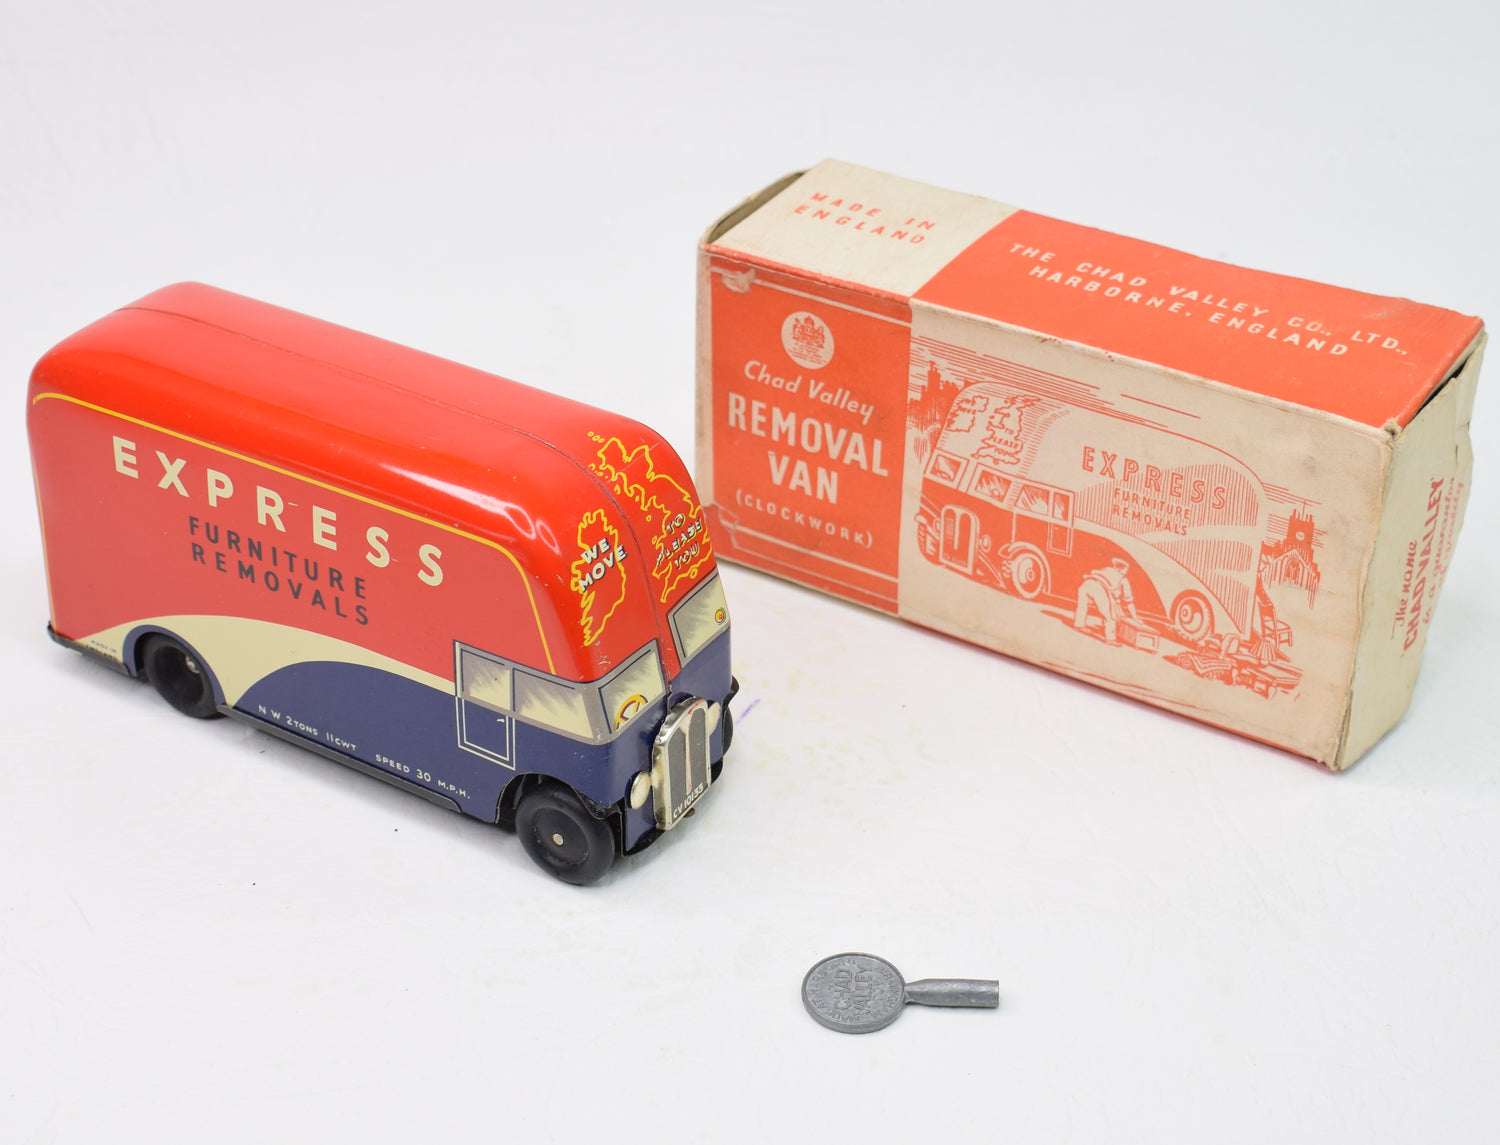 Chad Valley Removal Van Virtually Mint/Boxed